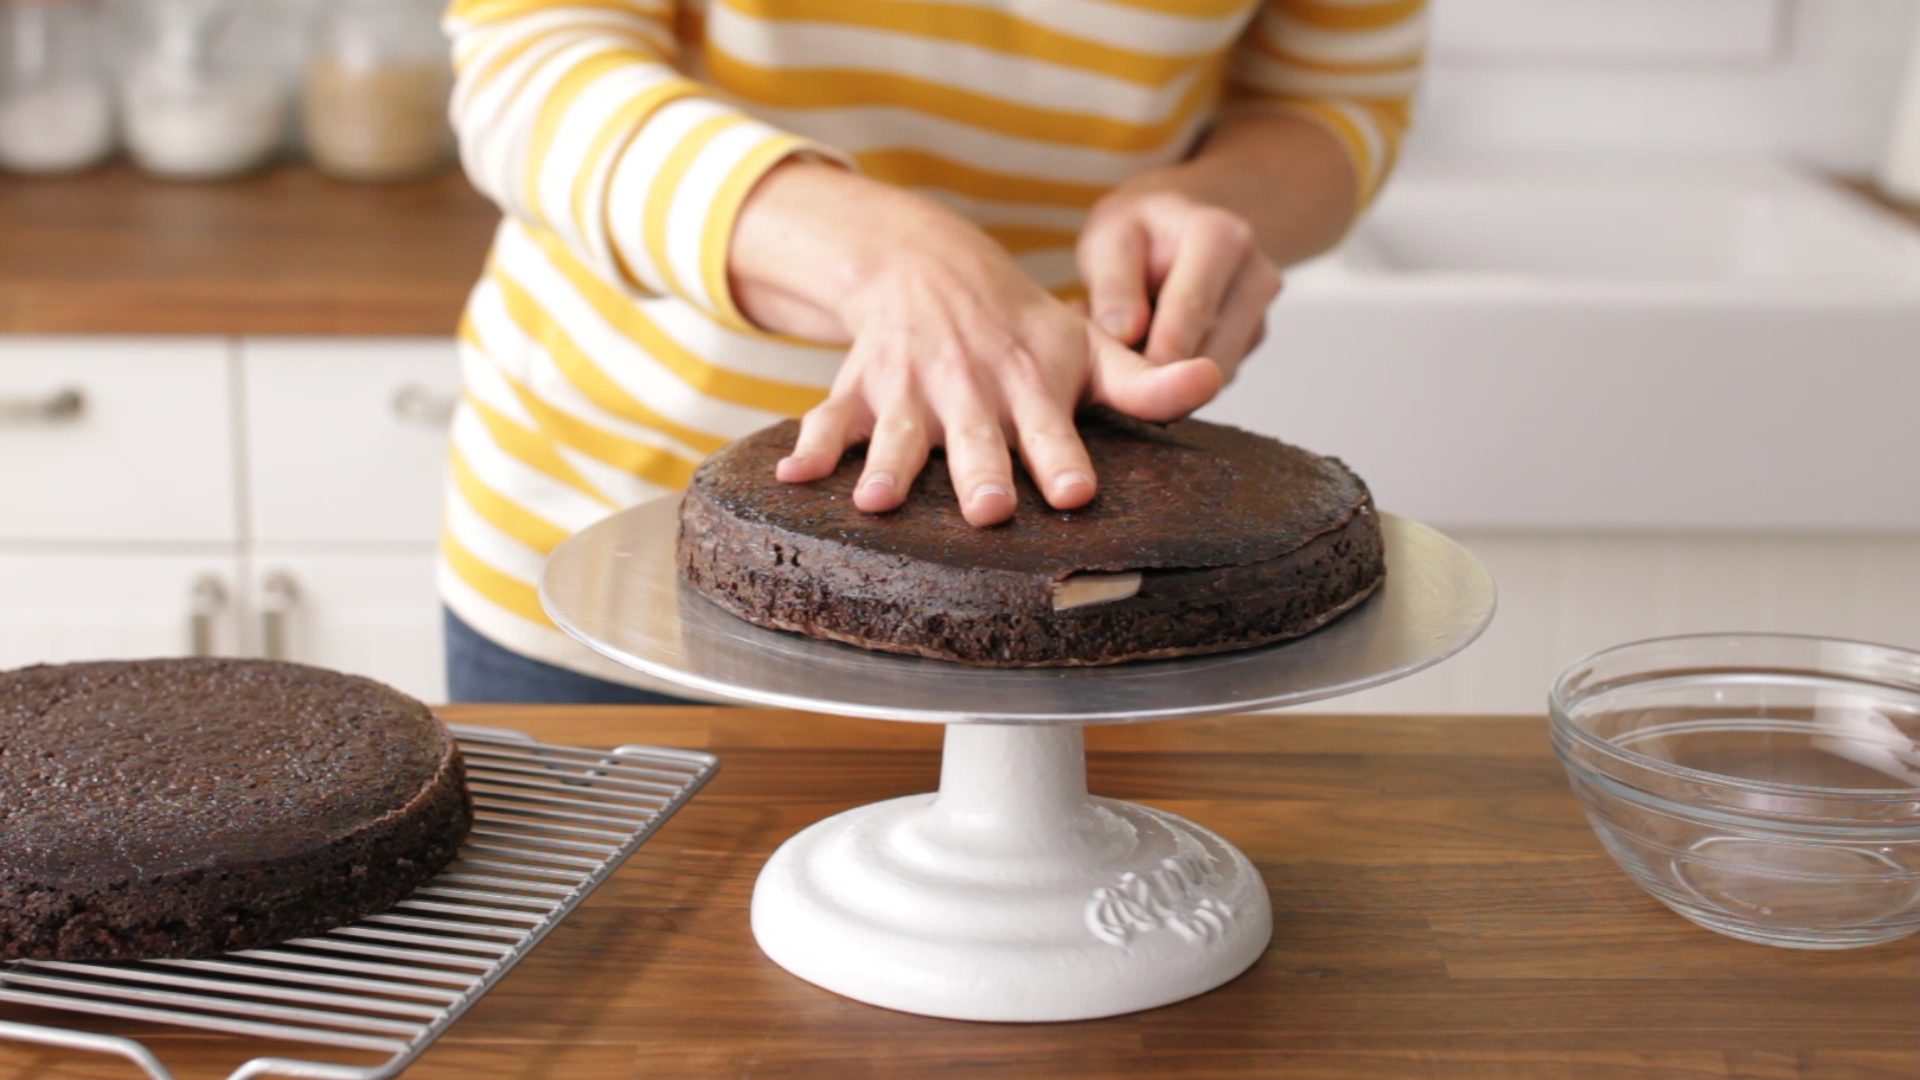  How to Frost a Cake the Easy and Elegant Way